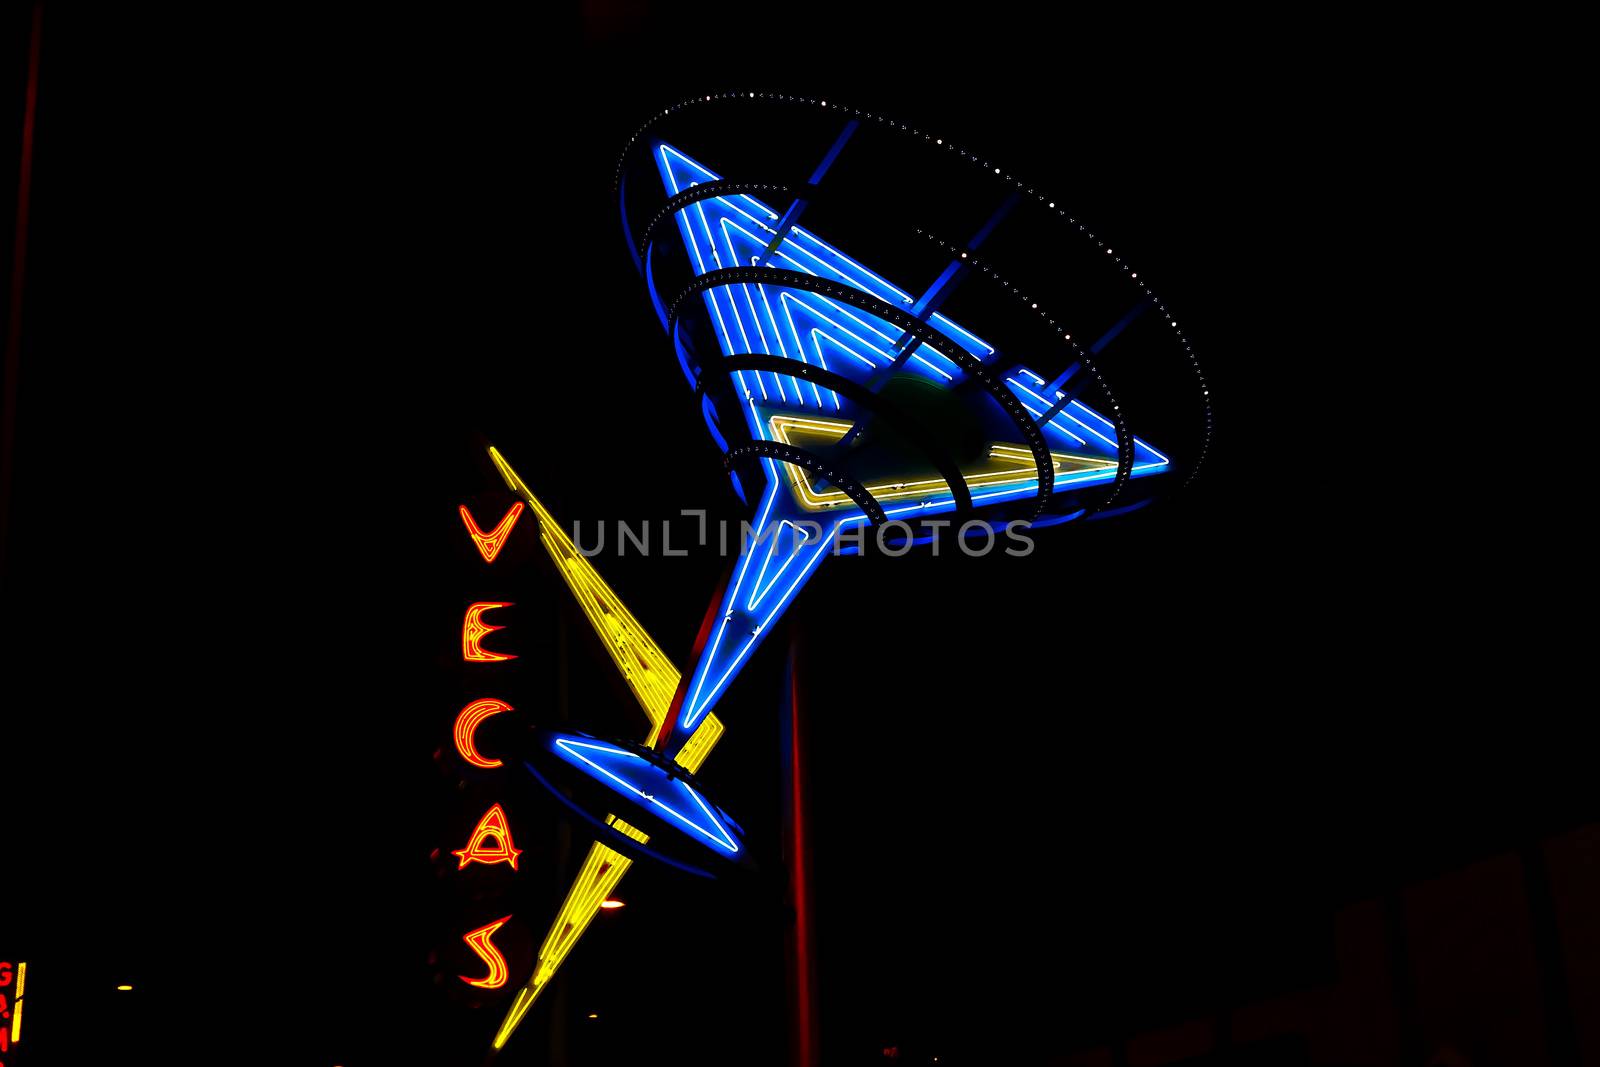 Las Vegas,NV/USA - Oct 09,2016 : "Oscar's Neon Martini Glass"  and Vegas giant neon sign on display above the street near Fremont Street Experience in Las Vegas.The Fremont Street Experience is a pedestrian mall and attraction in downtown Las Vegas.